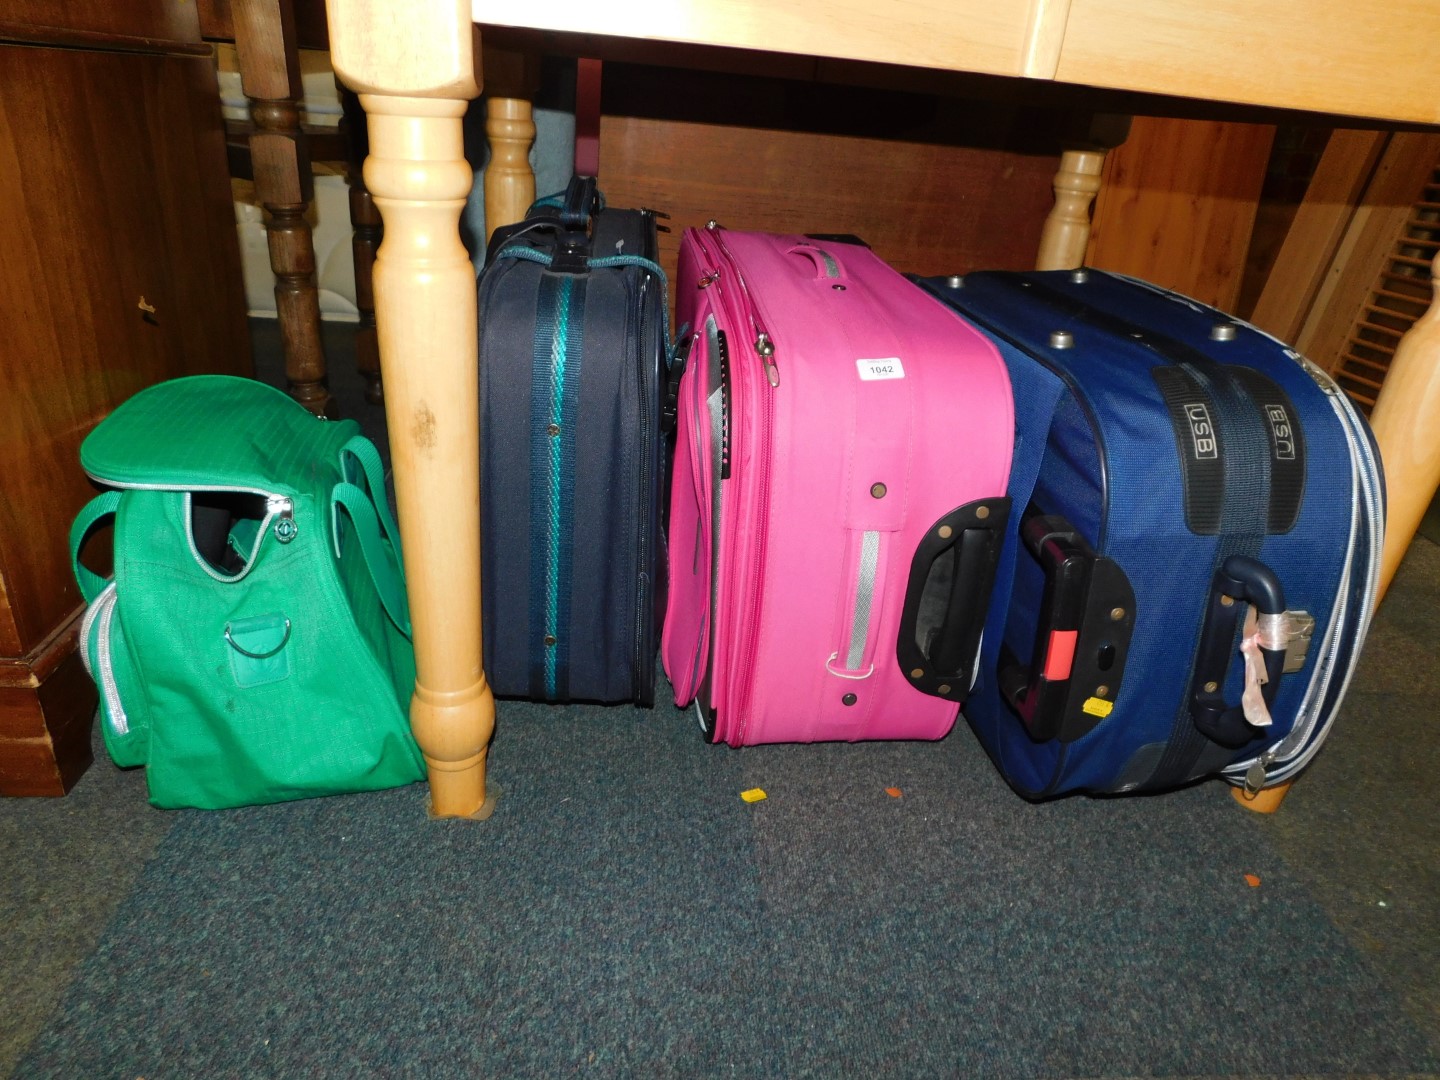 Three suitcases, together with a Carlton overnight bag. (4)